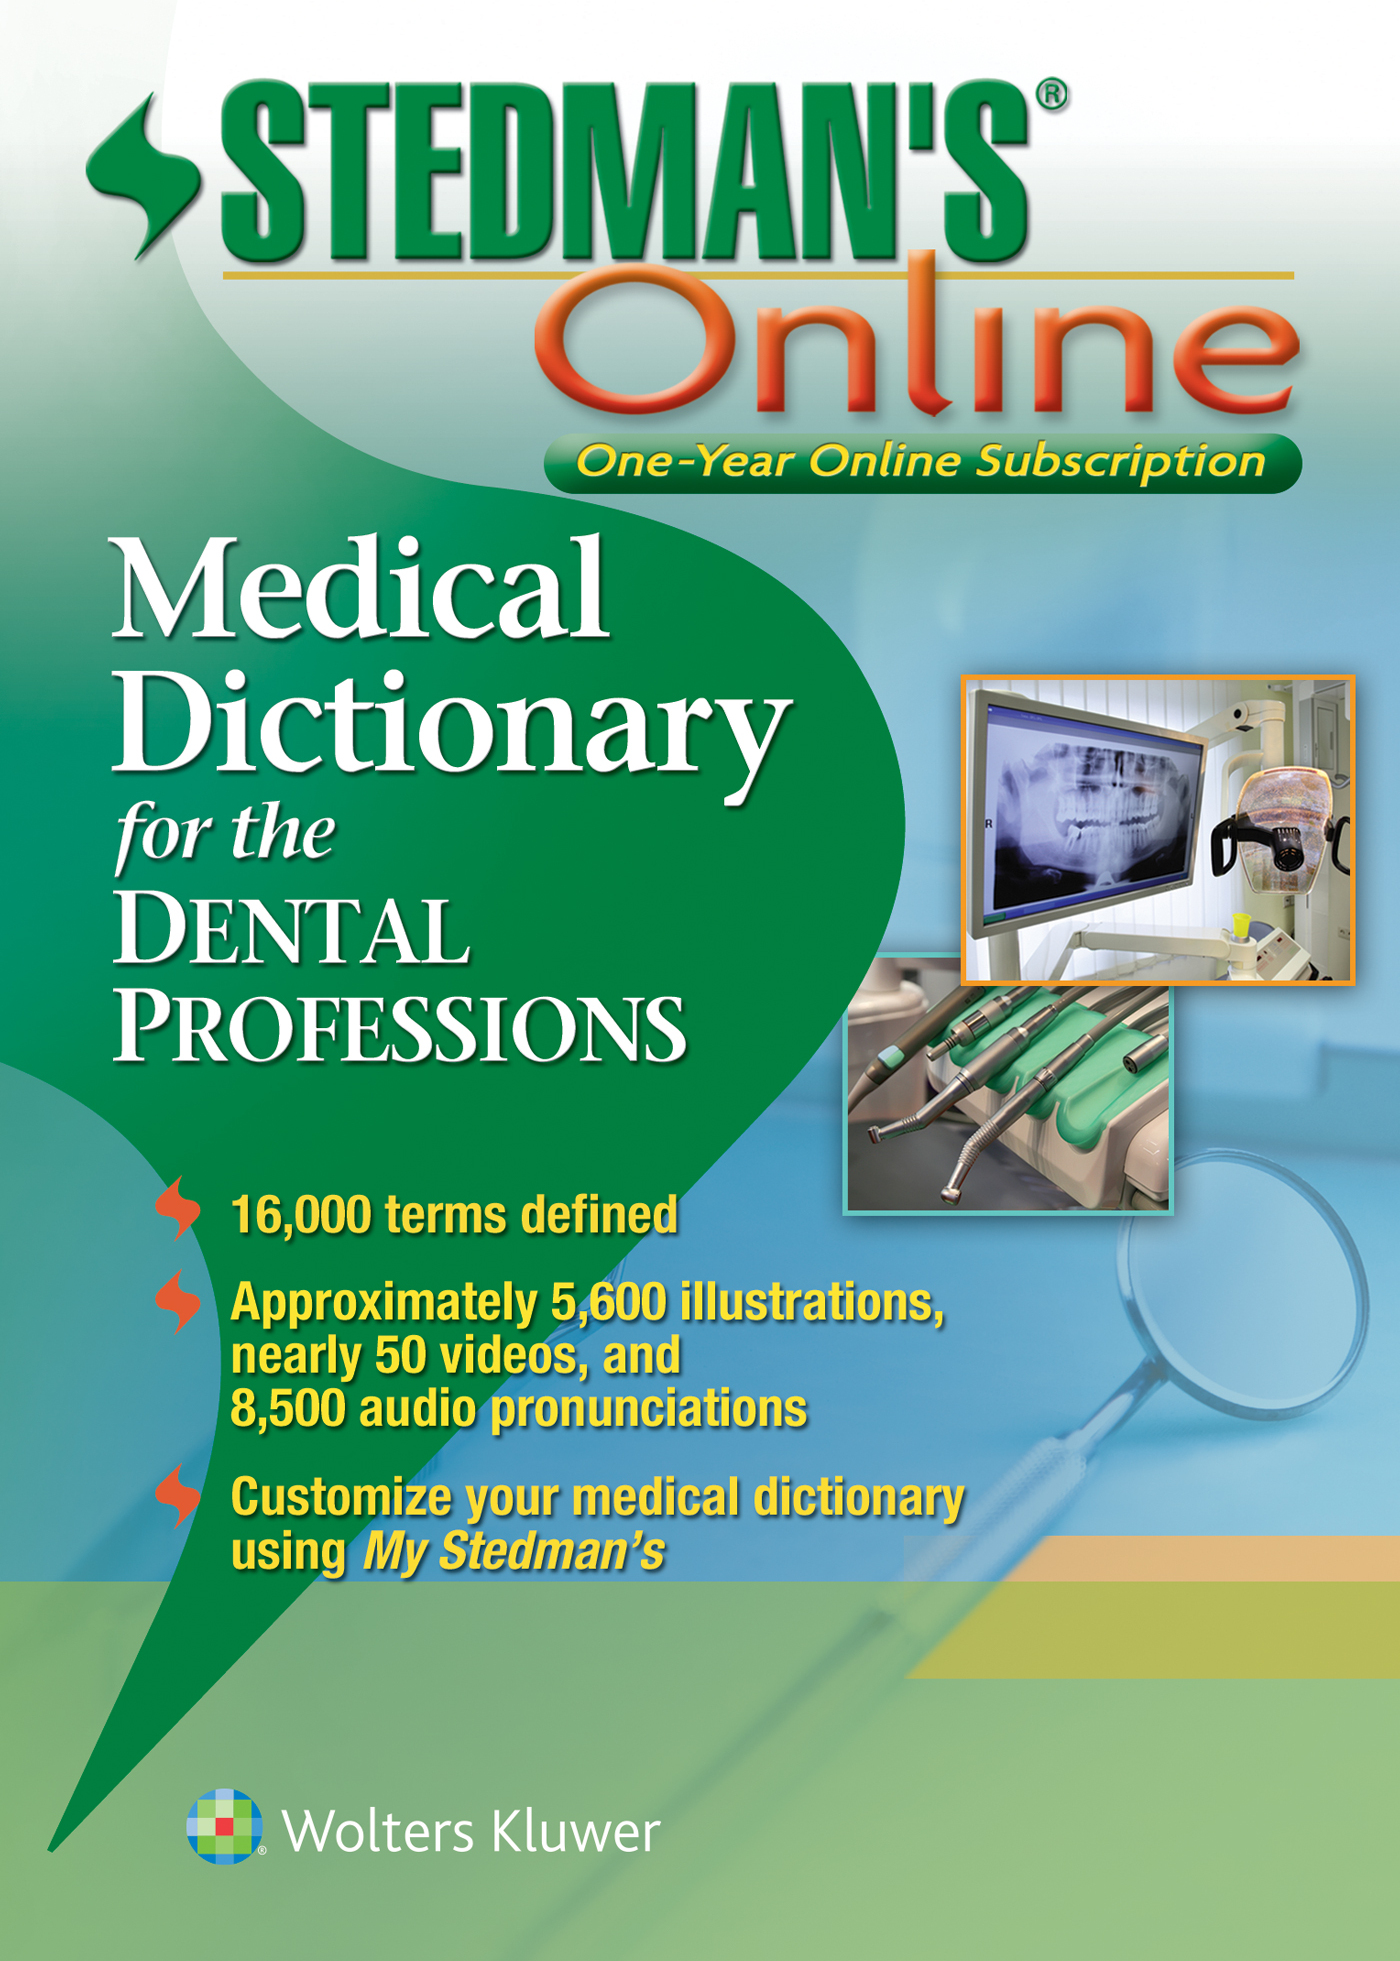 Stedman’s Medical Dictionary for the Dental Professions book cover